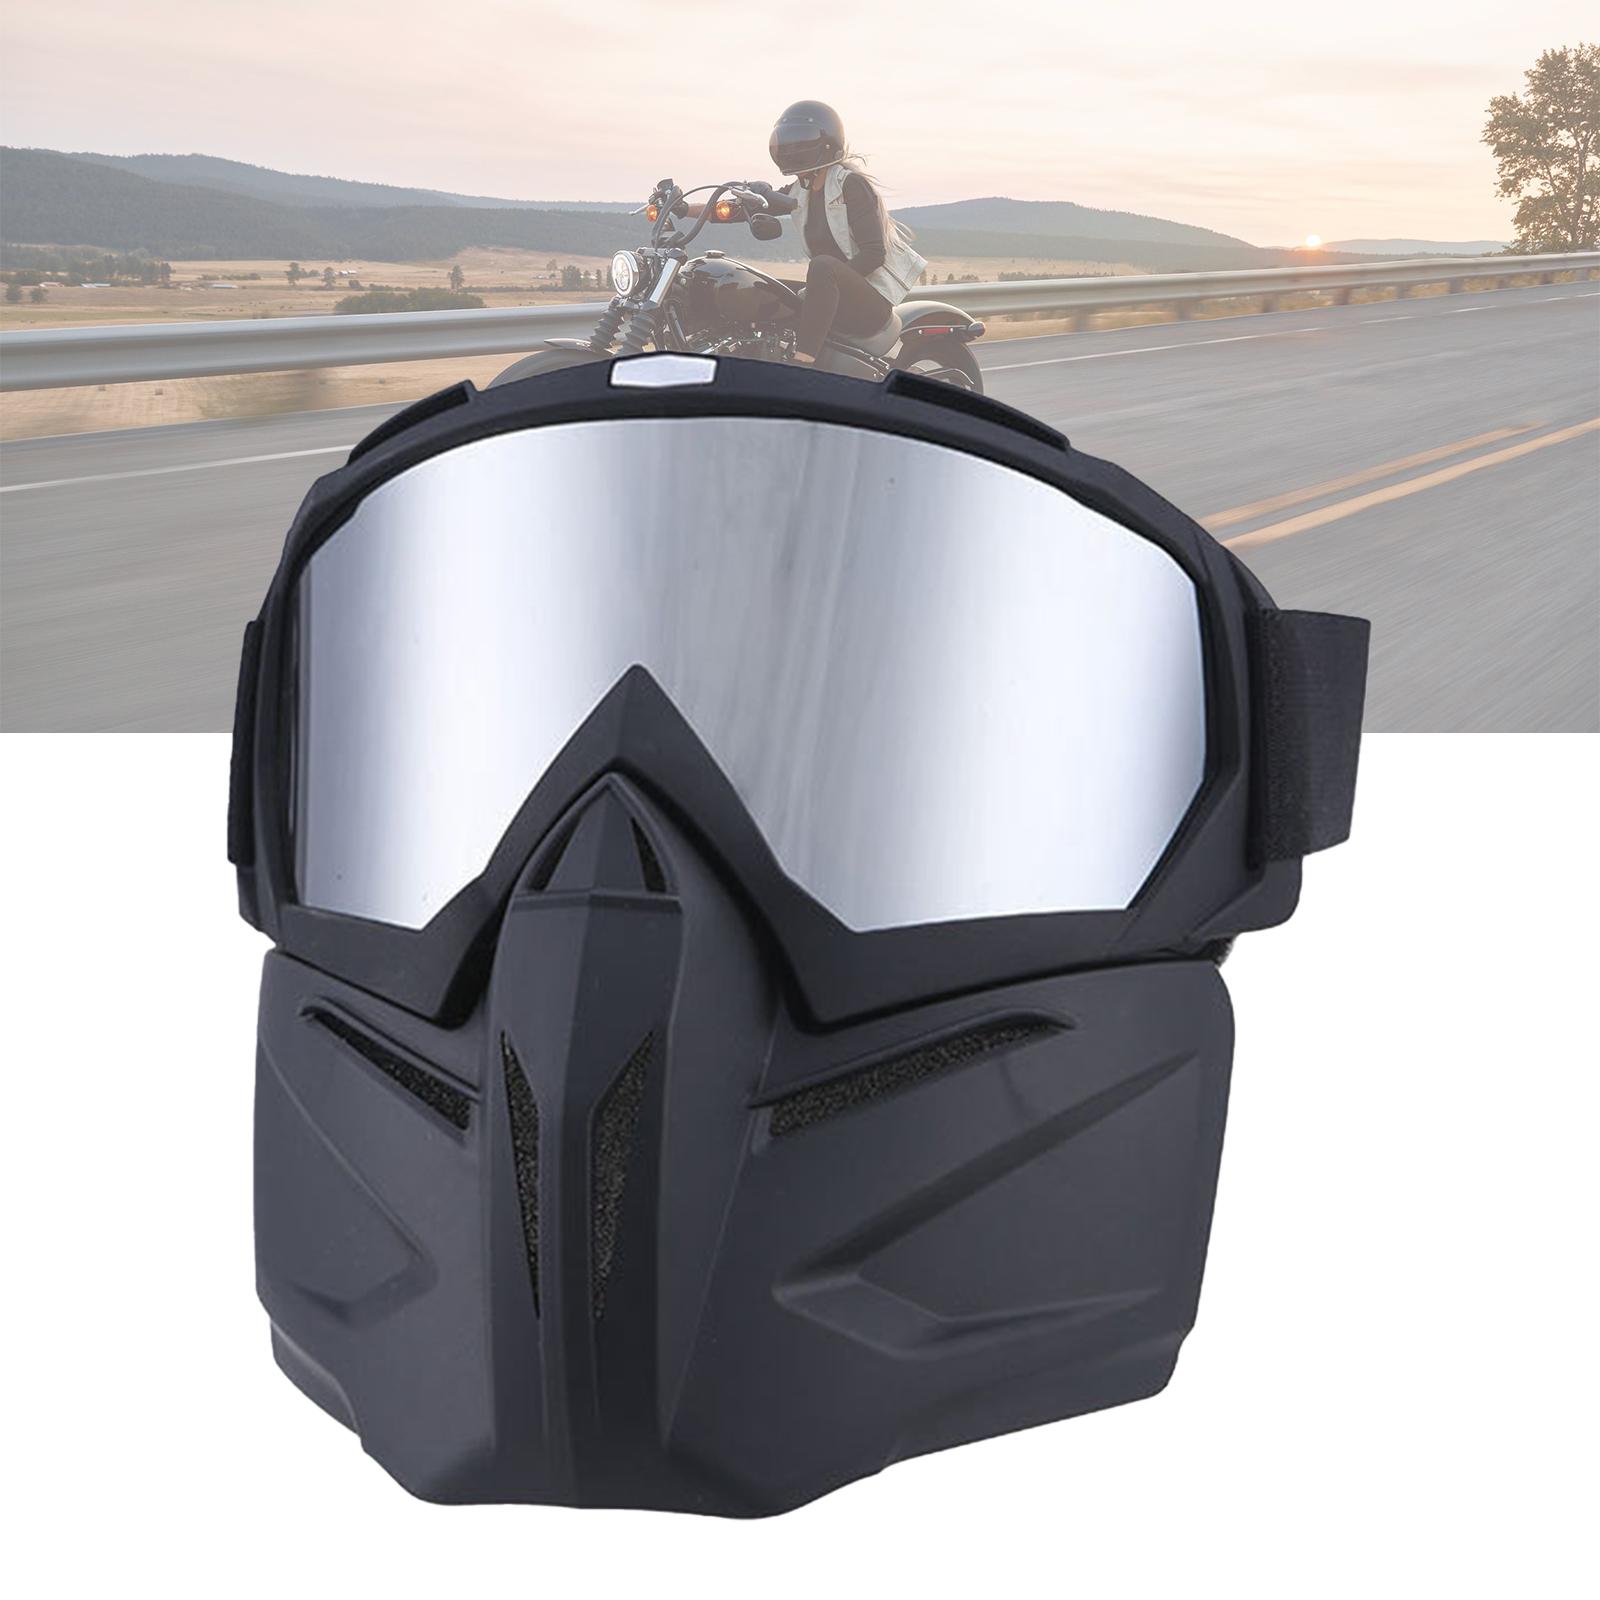 Baoblaze Motorcycle Helmet Riding Goggles Glasses with Face Mask Bicycle